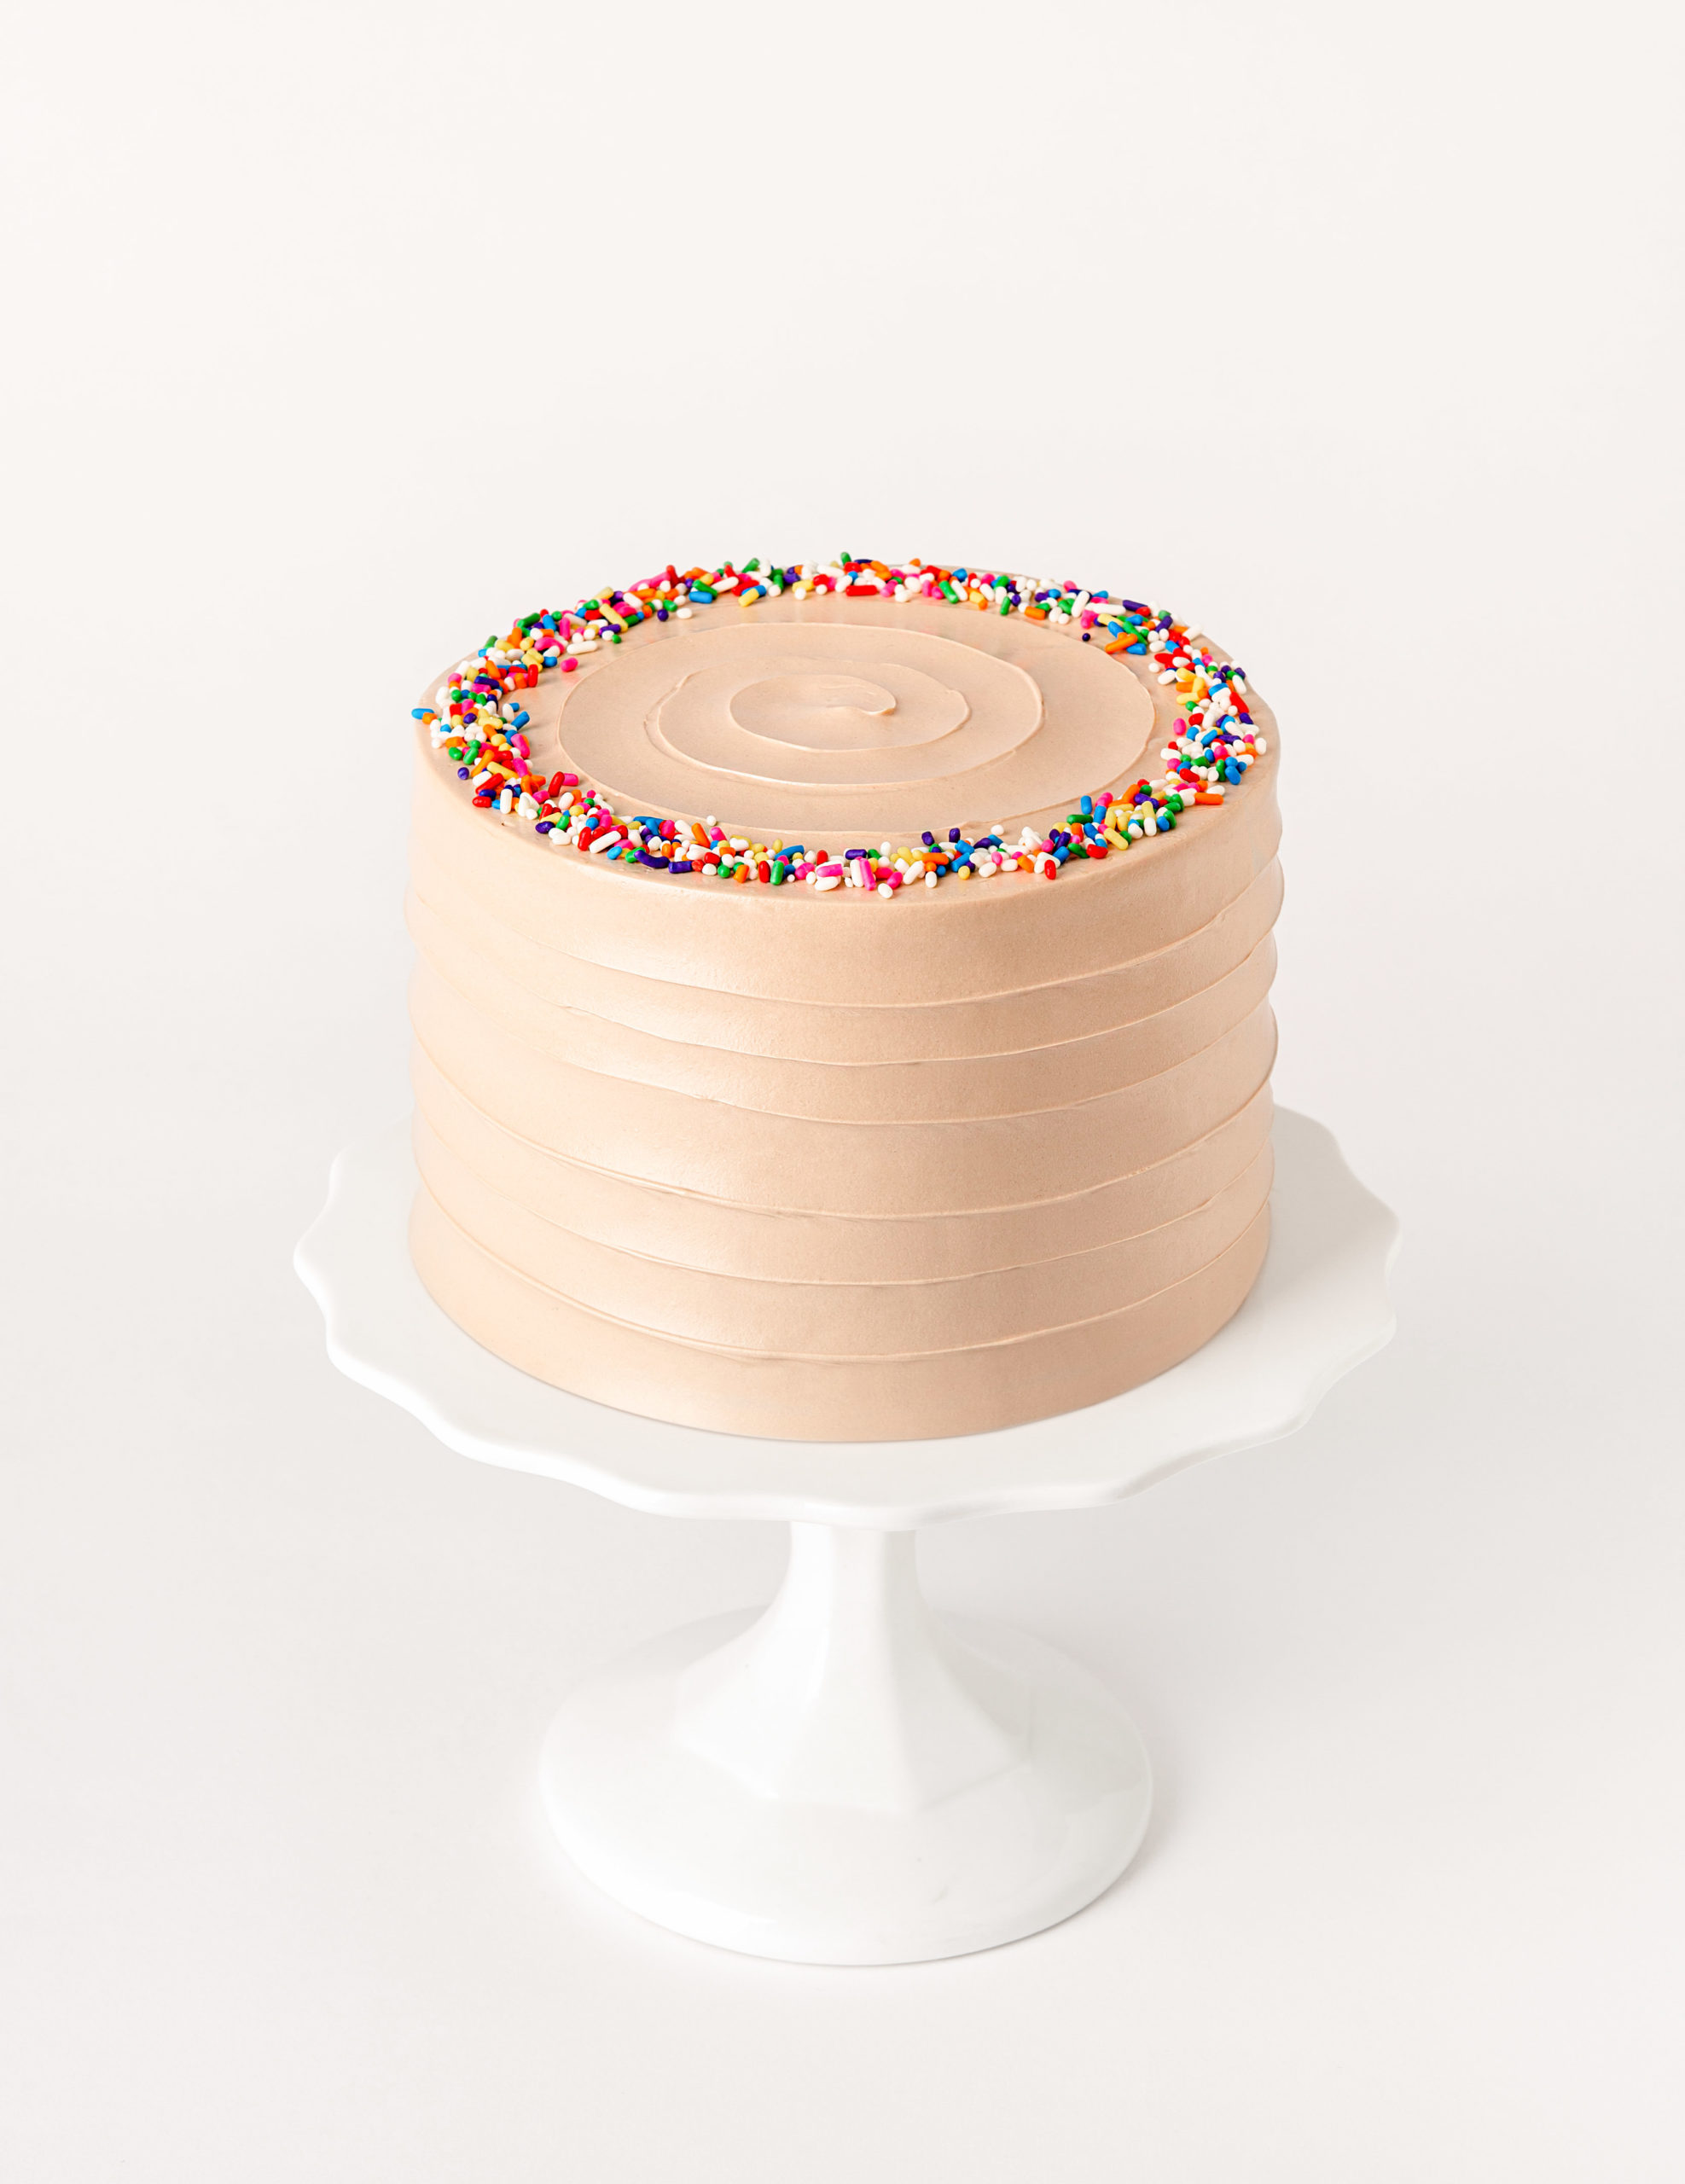 Classic Birthday Cake Recipe with sprinkles - Crazy for Crust